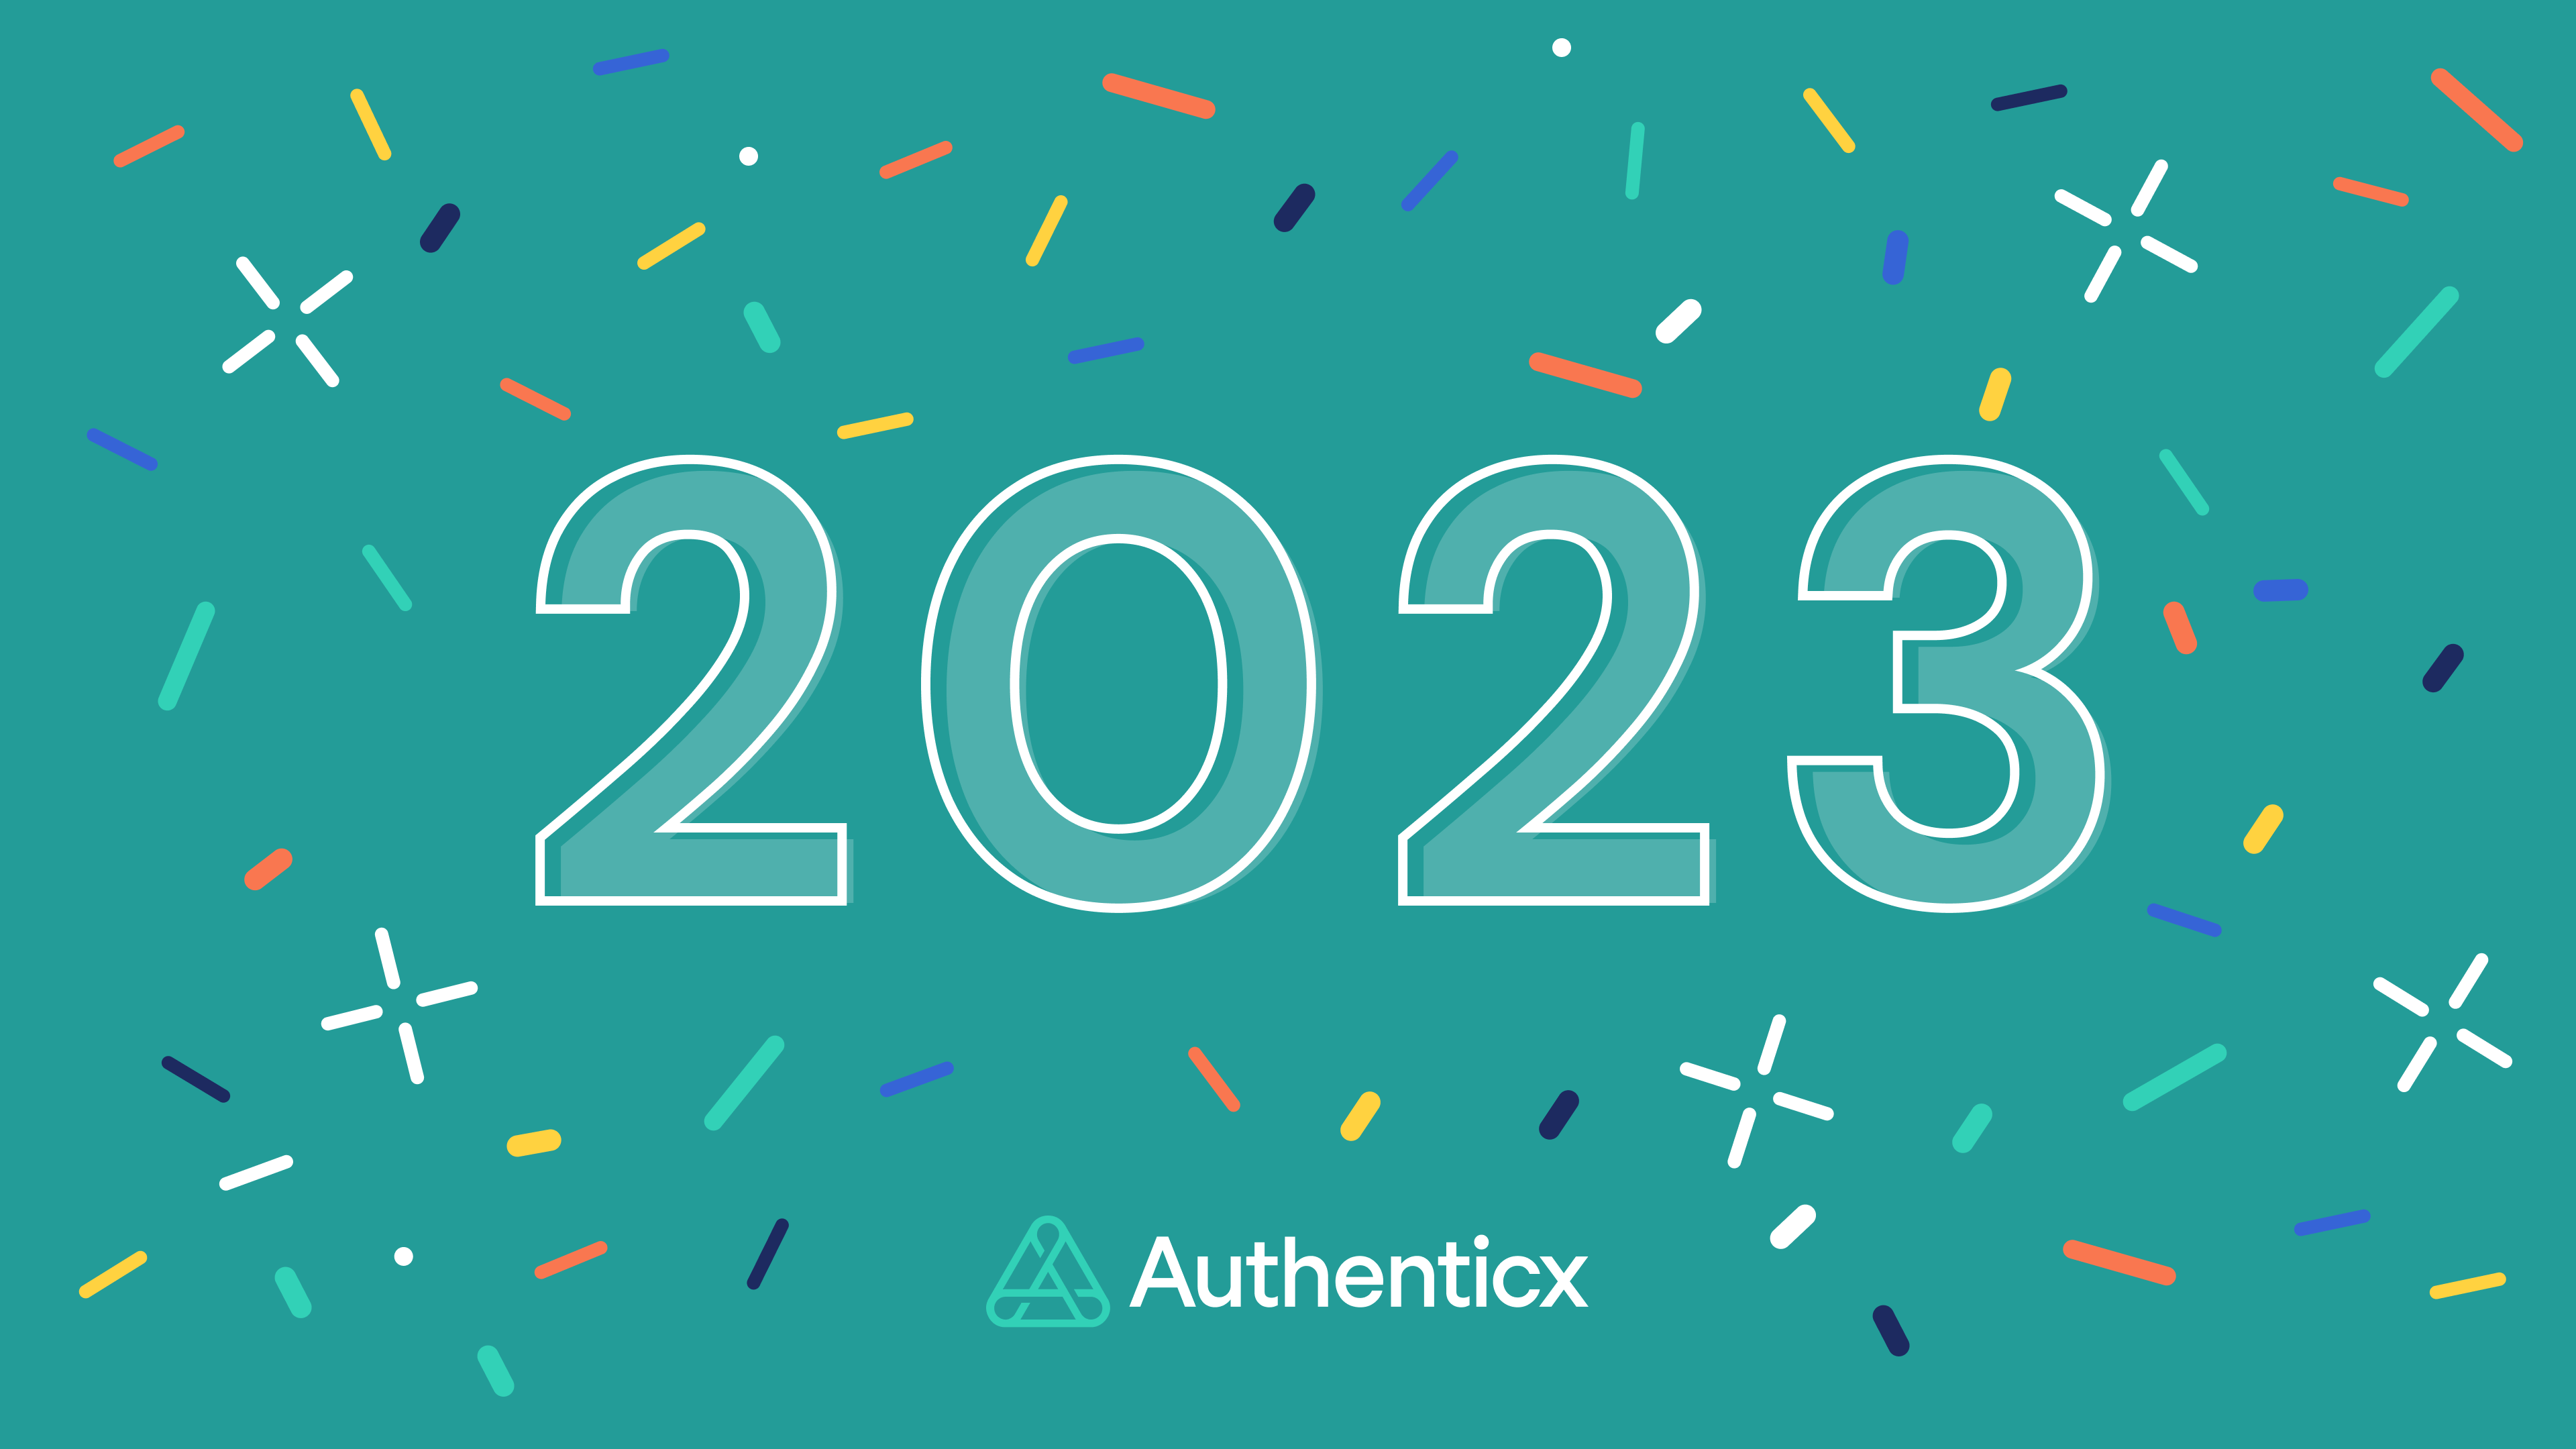 Authenticx Growth 2023